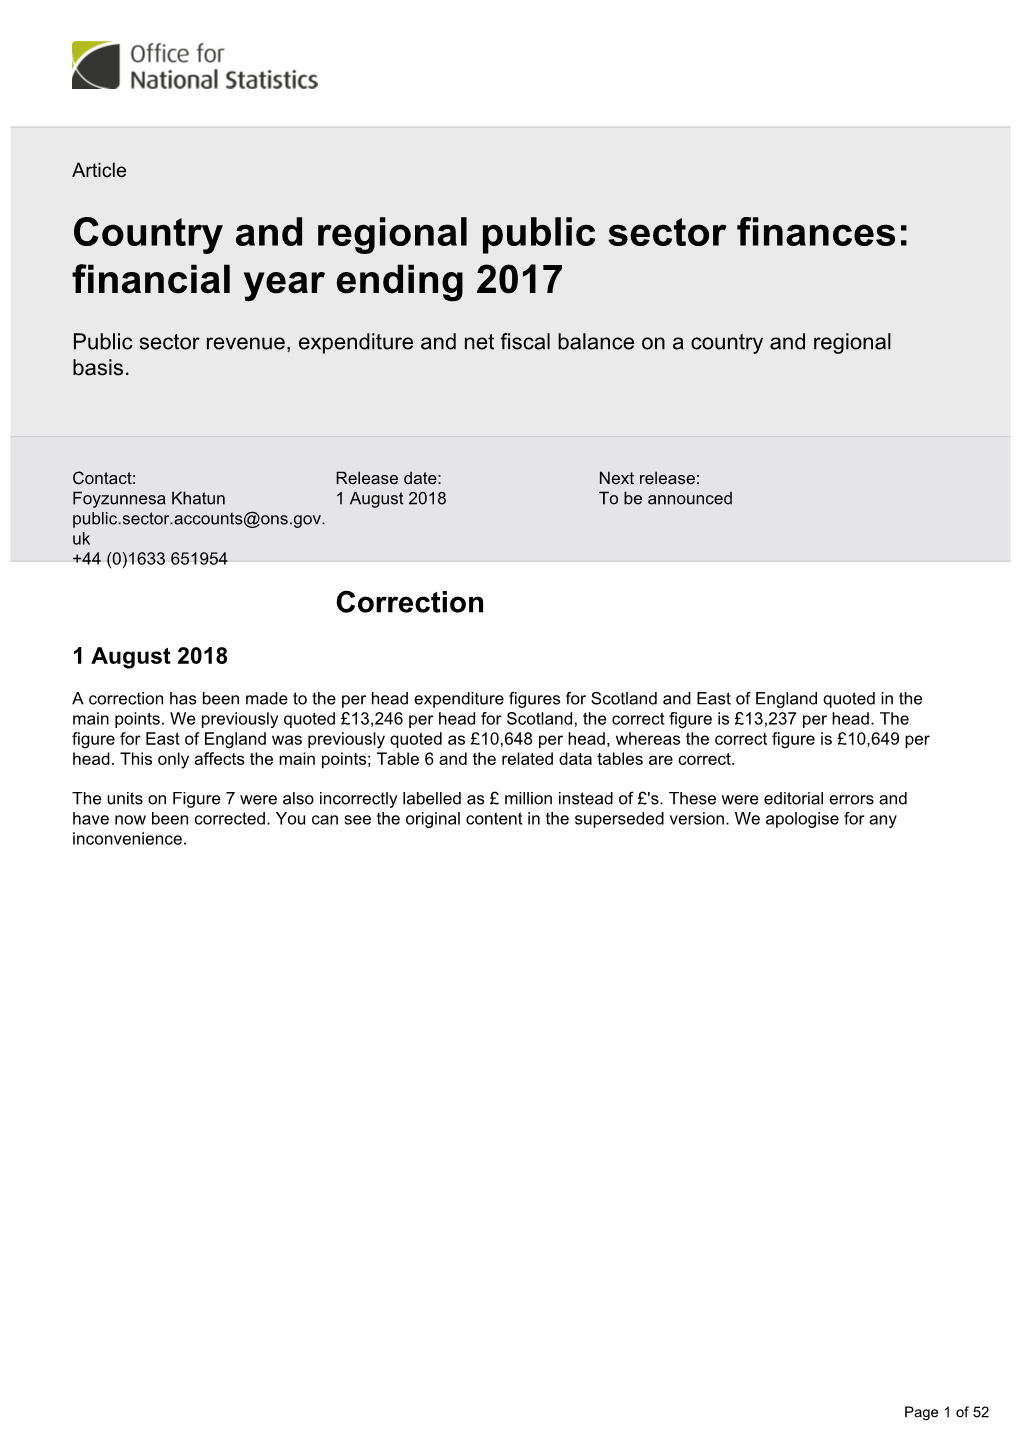 Country and Regional Public Sector Finances: Financial Year Ending 2017